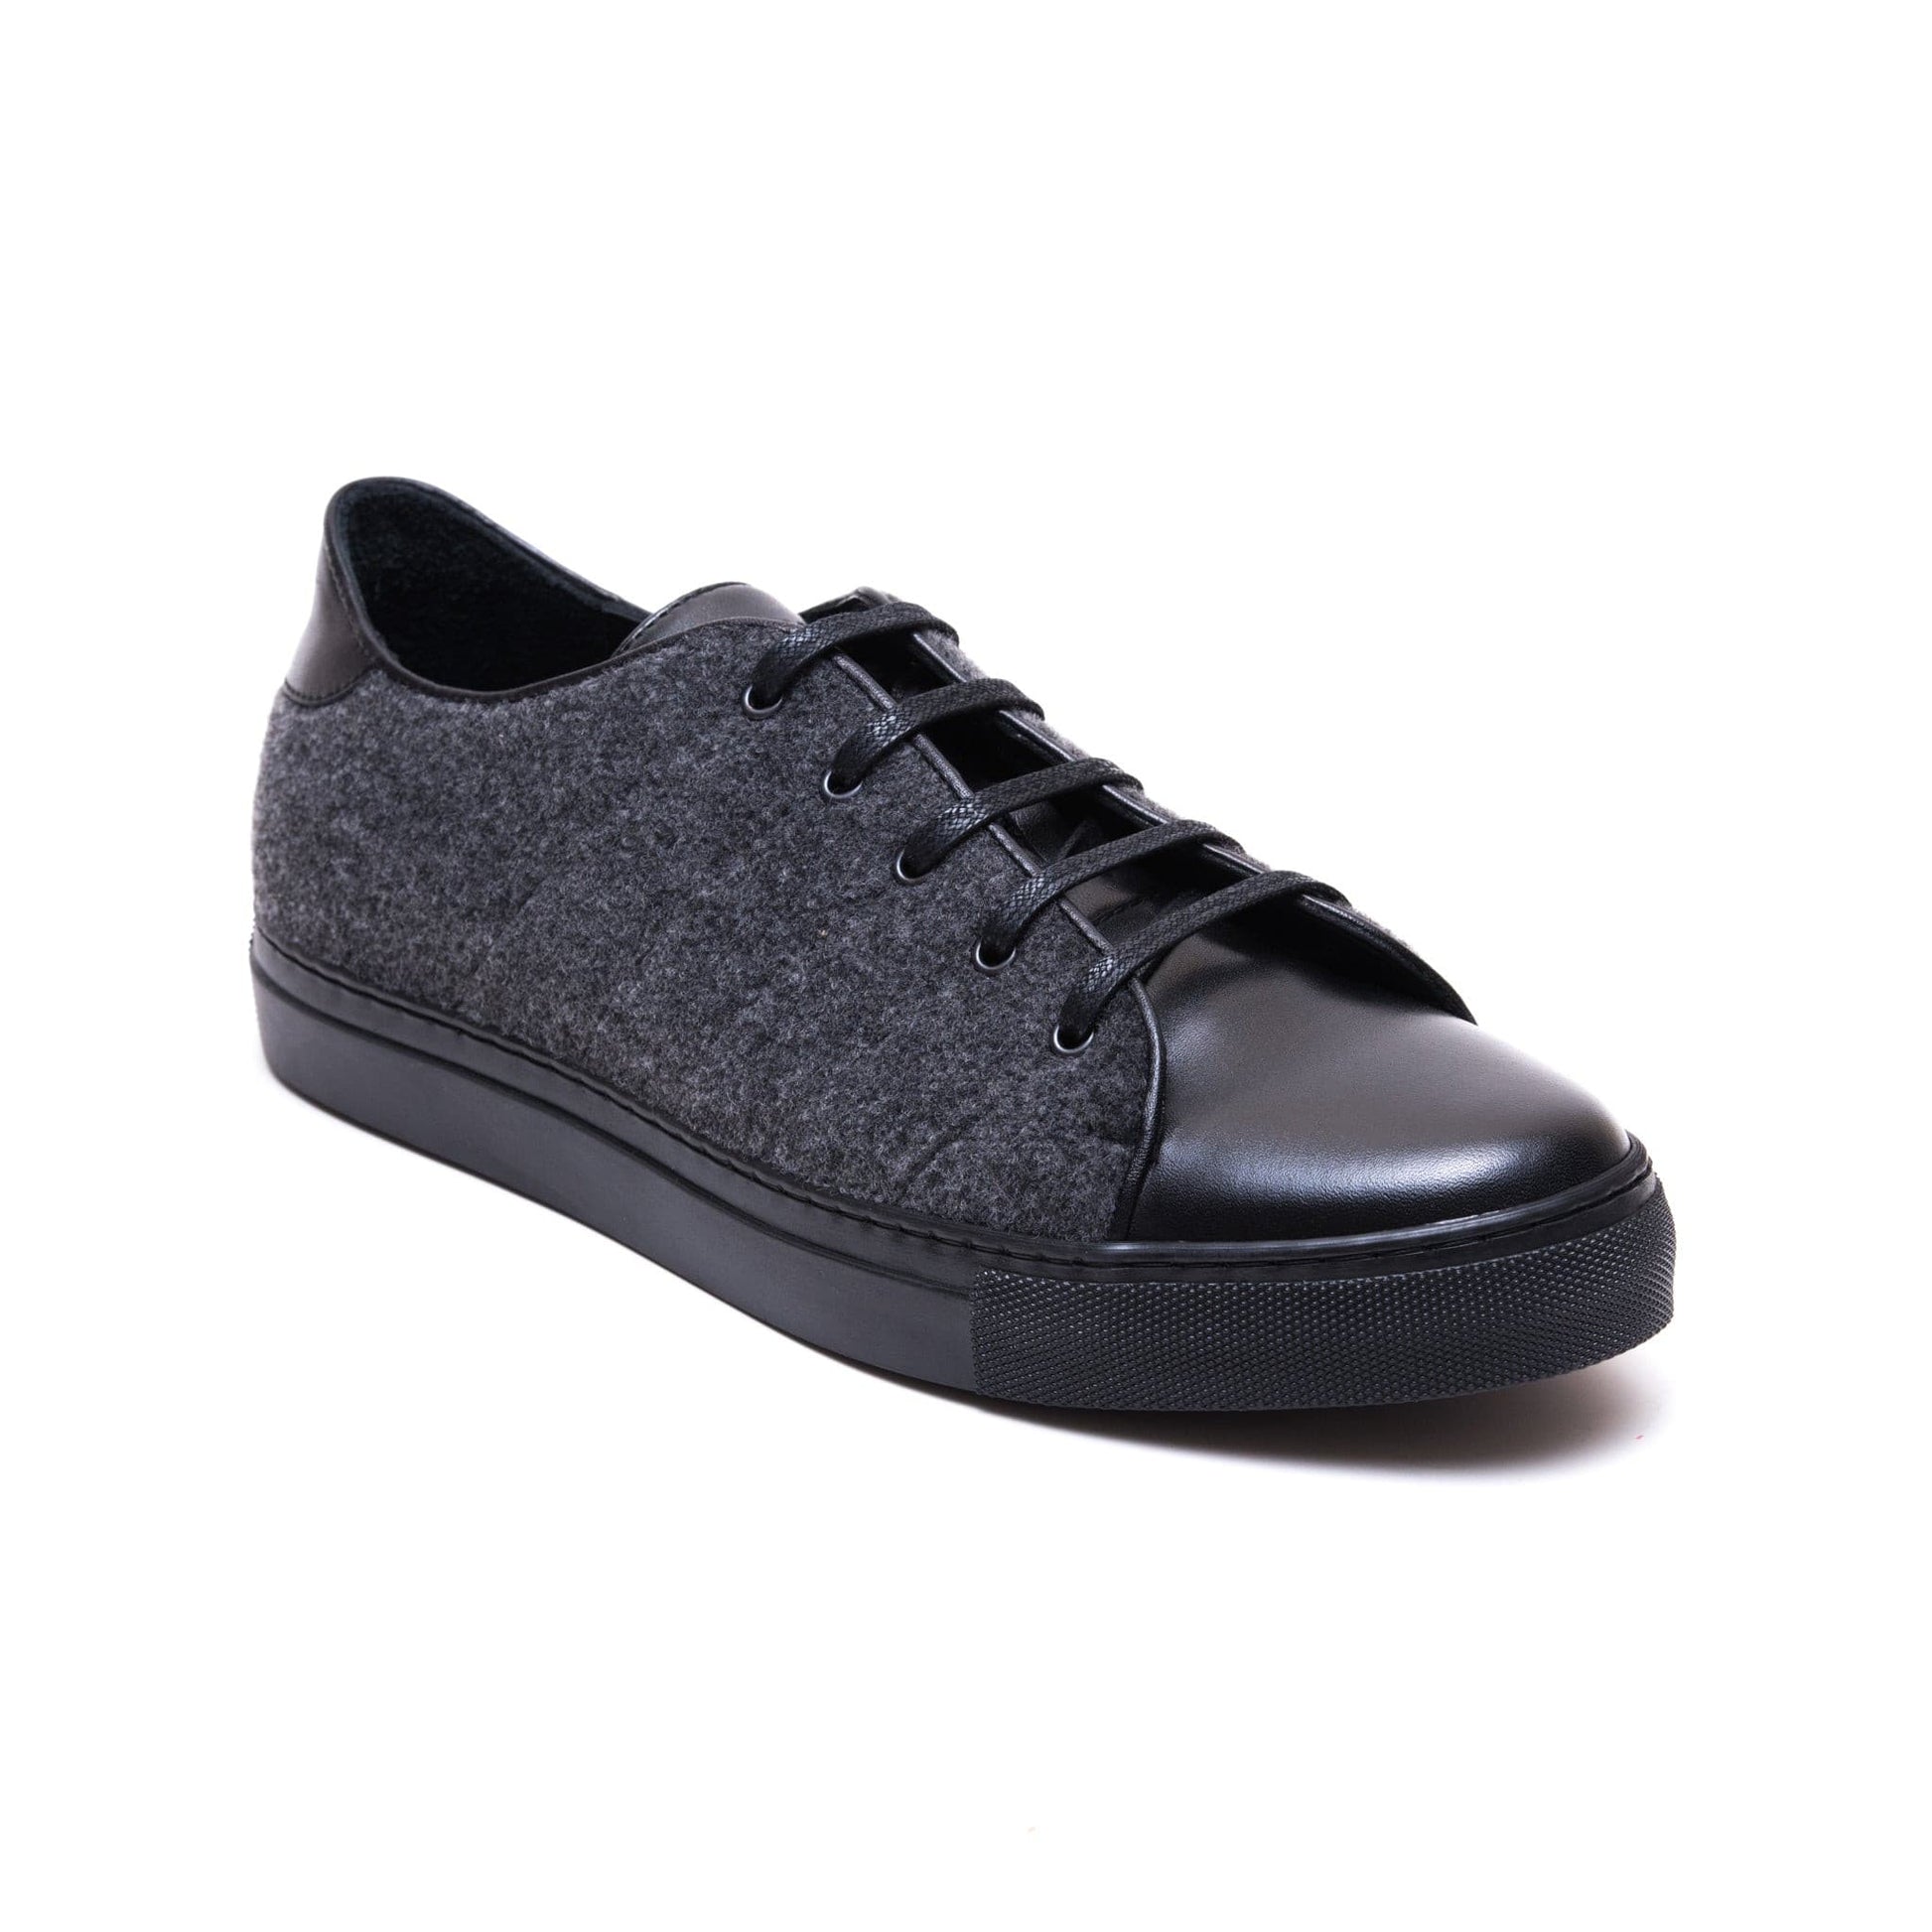 Grey and Black Leather Sneakers 49276-GRY.